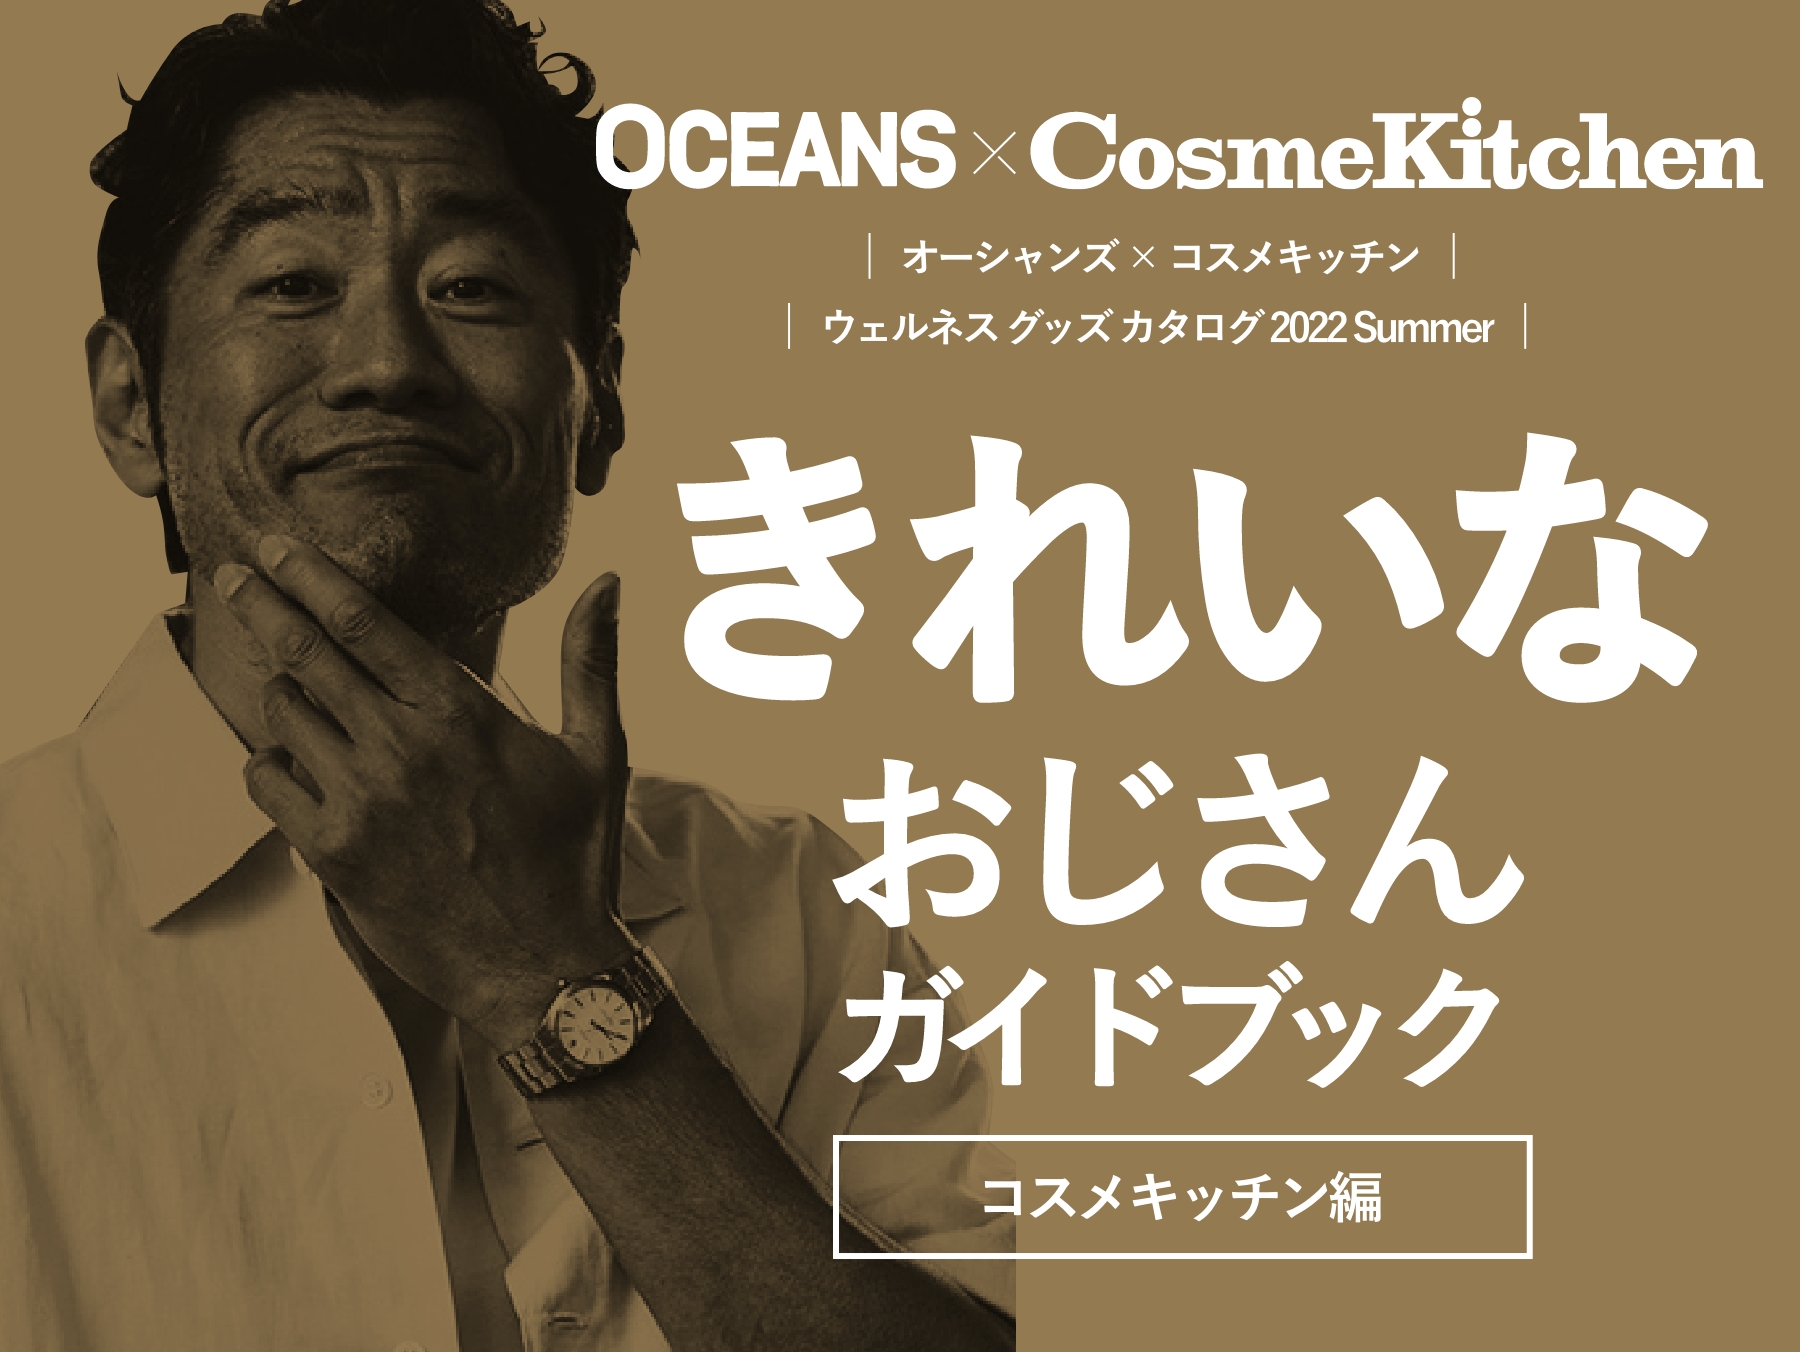 OCEANS × Cosme Kitchen ウェルネス グッズ カタログ 2022 Summer